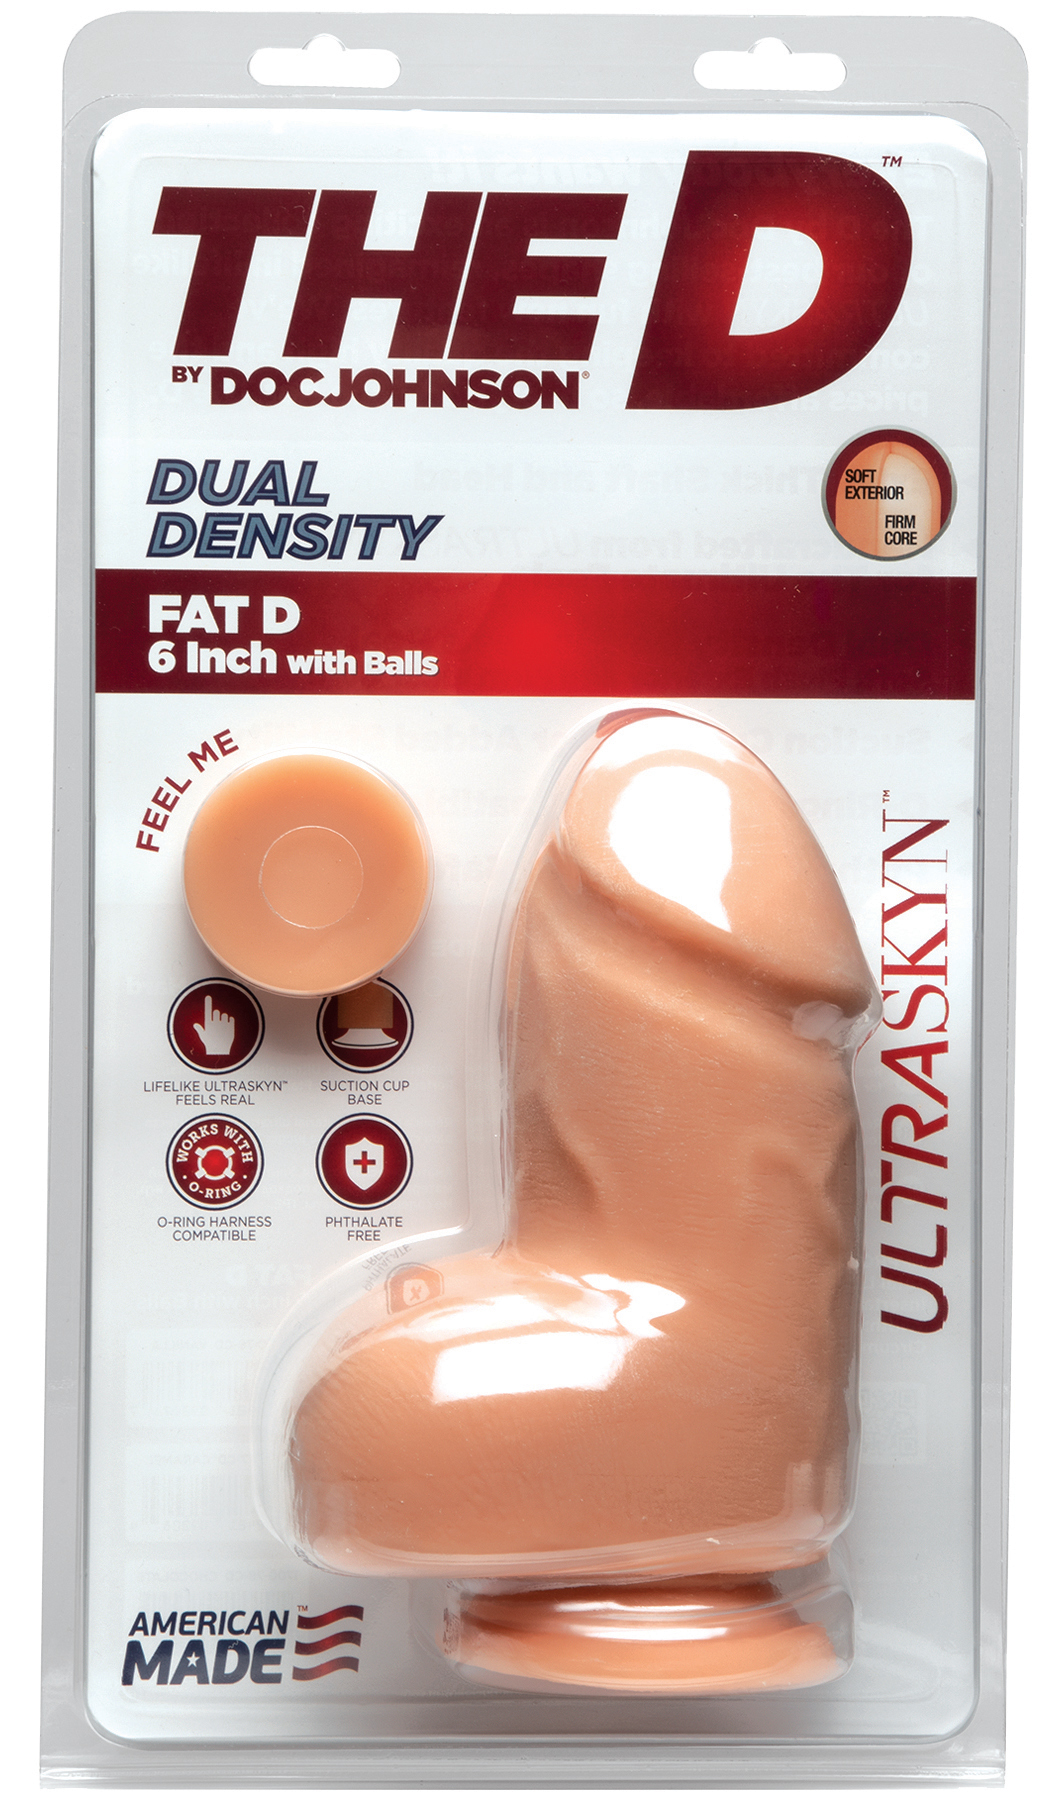 DOC JOHNSON The D Perfect D Dual Density 6' with Balls